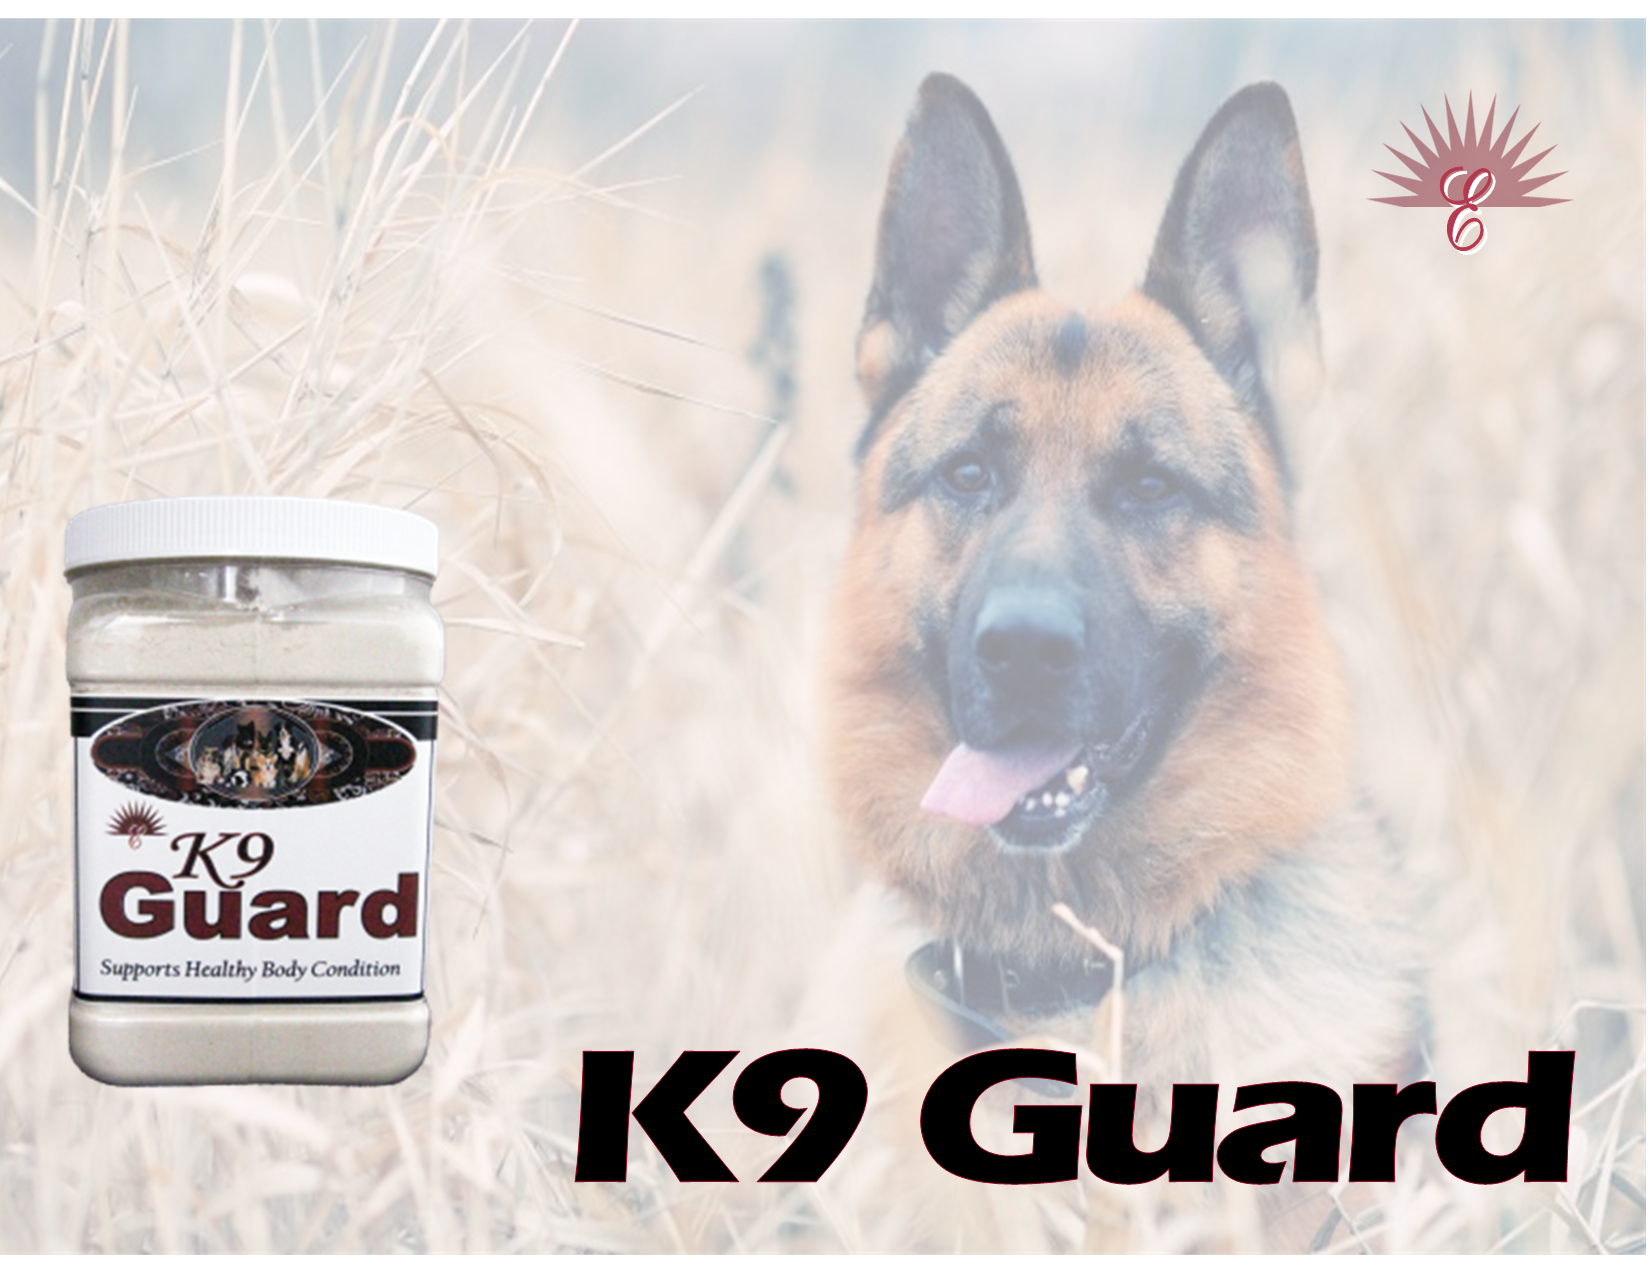 K-9 Guard Aid recovery following illness. May help remove toxins.